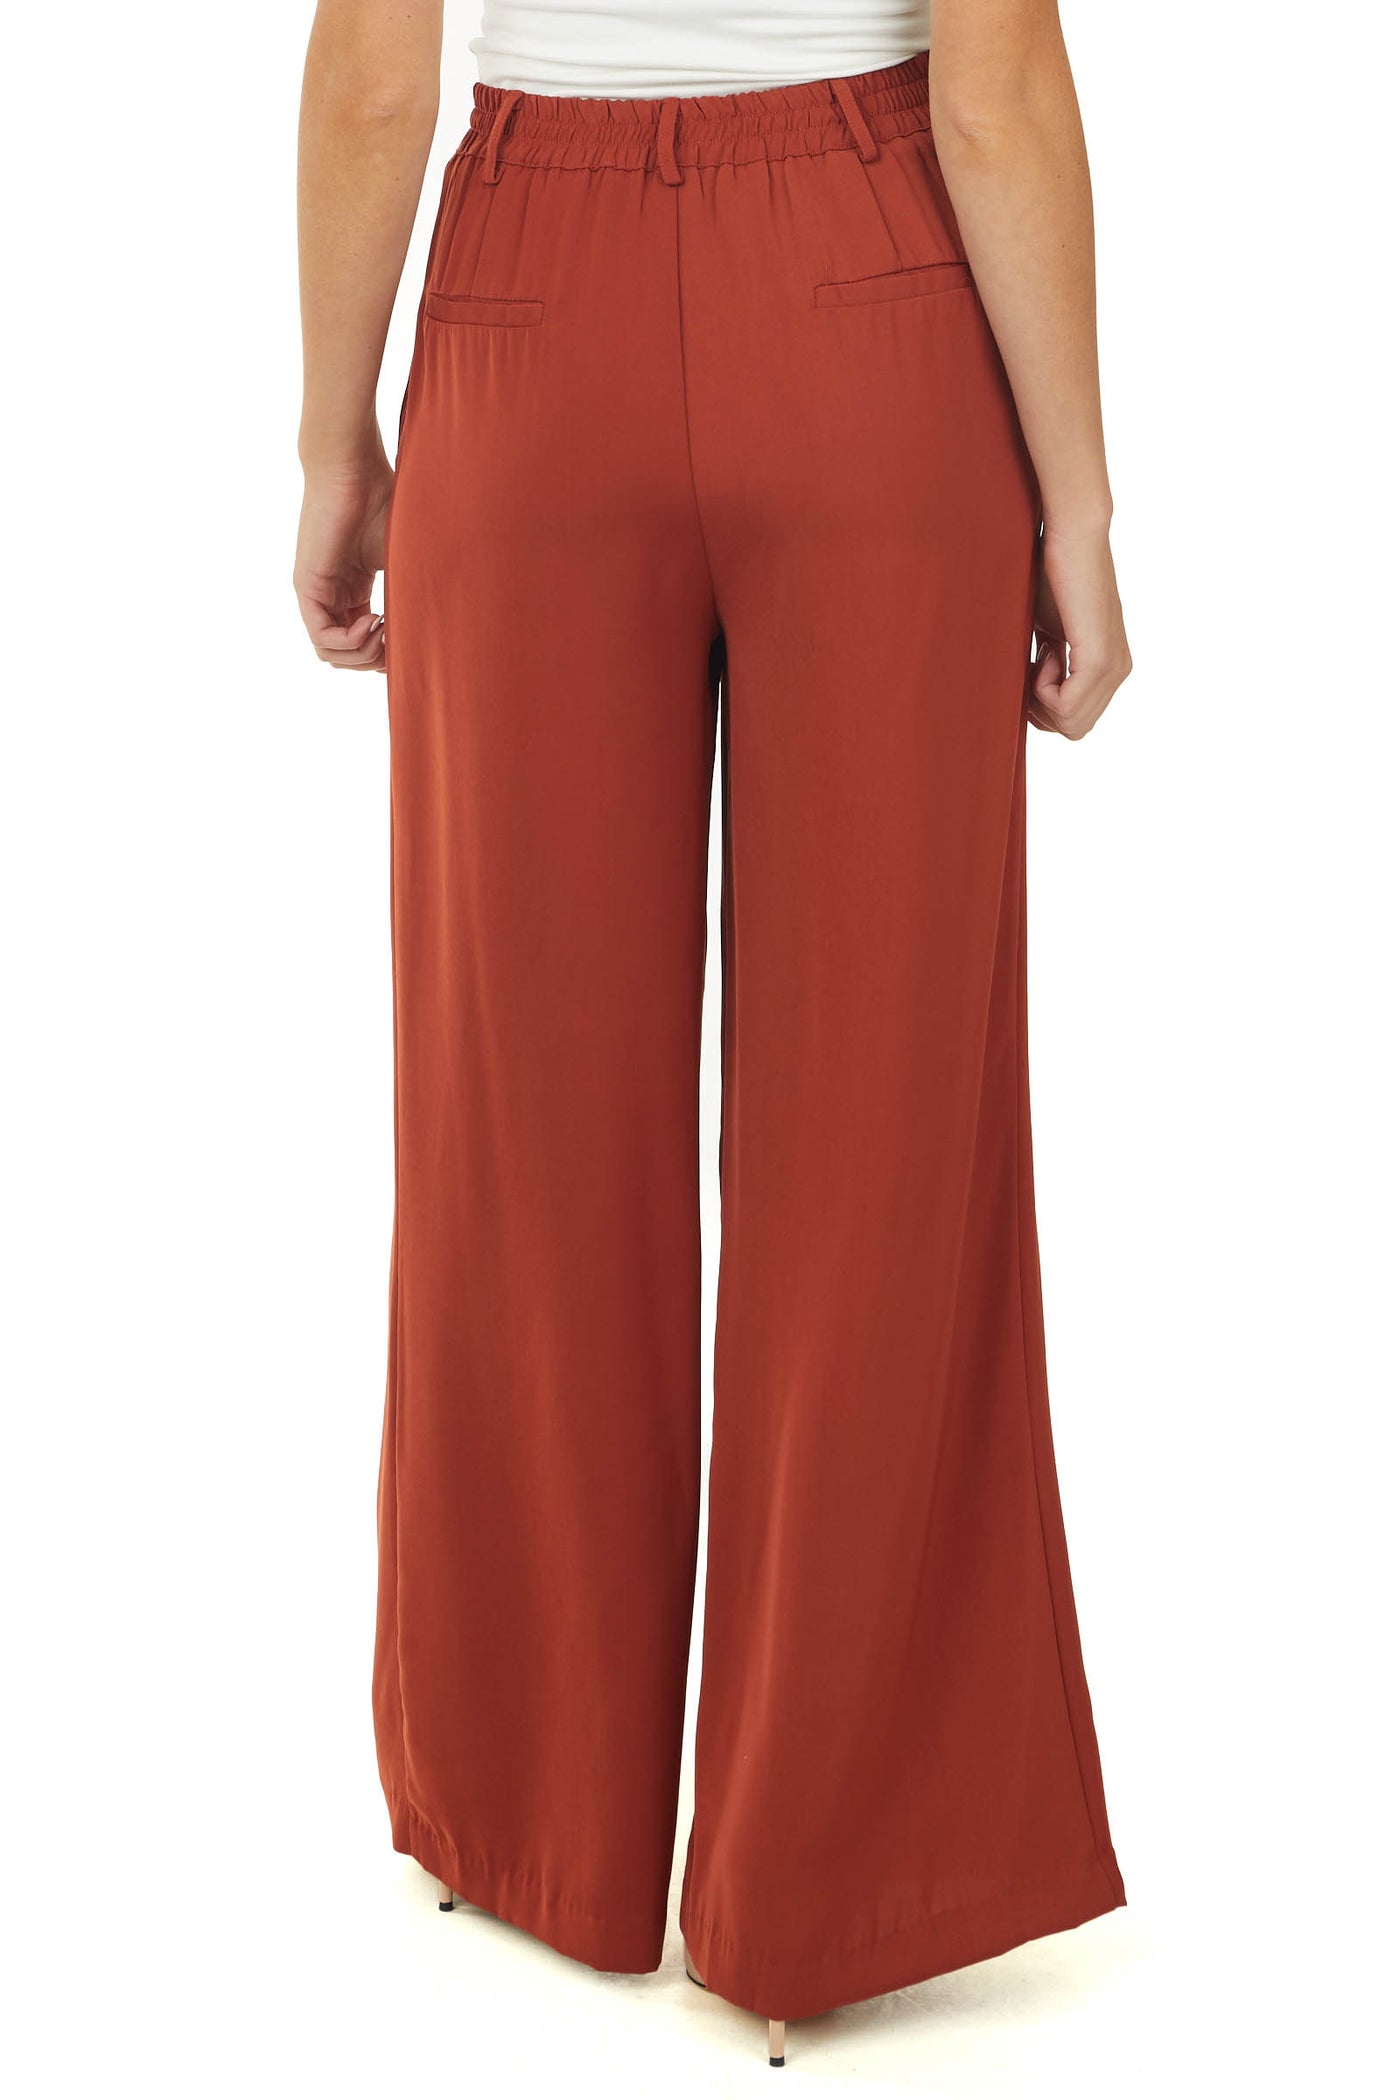 Rust Woven Wide Leg Flowy Pants with Pockets